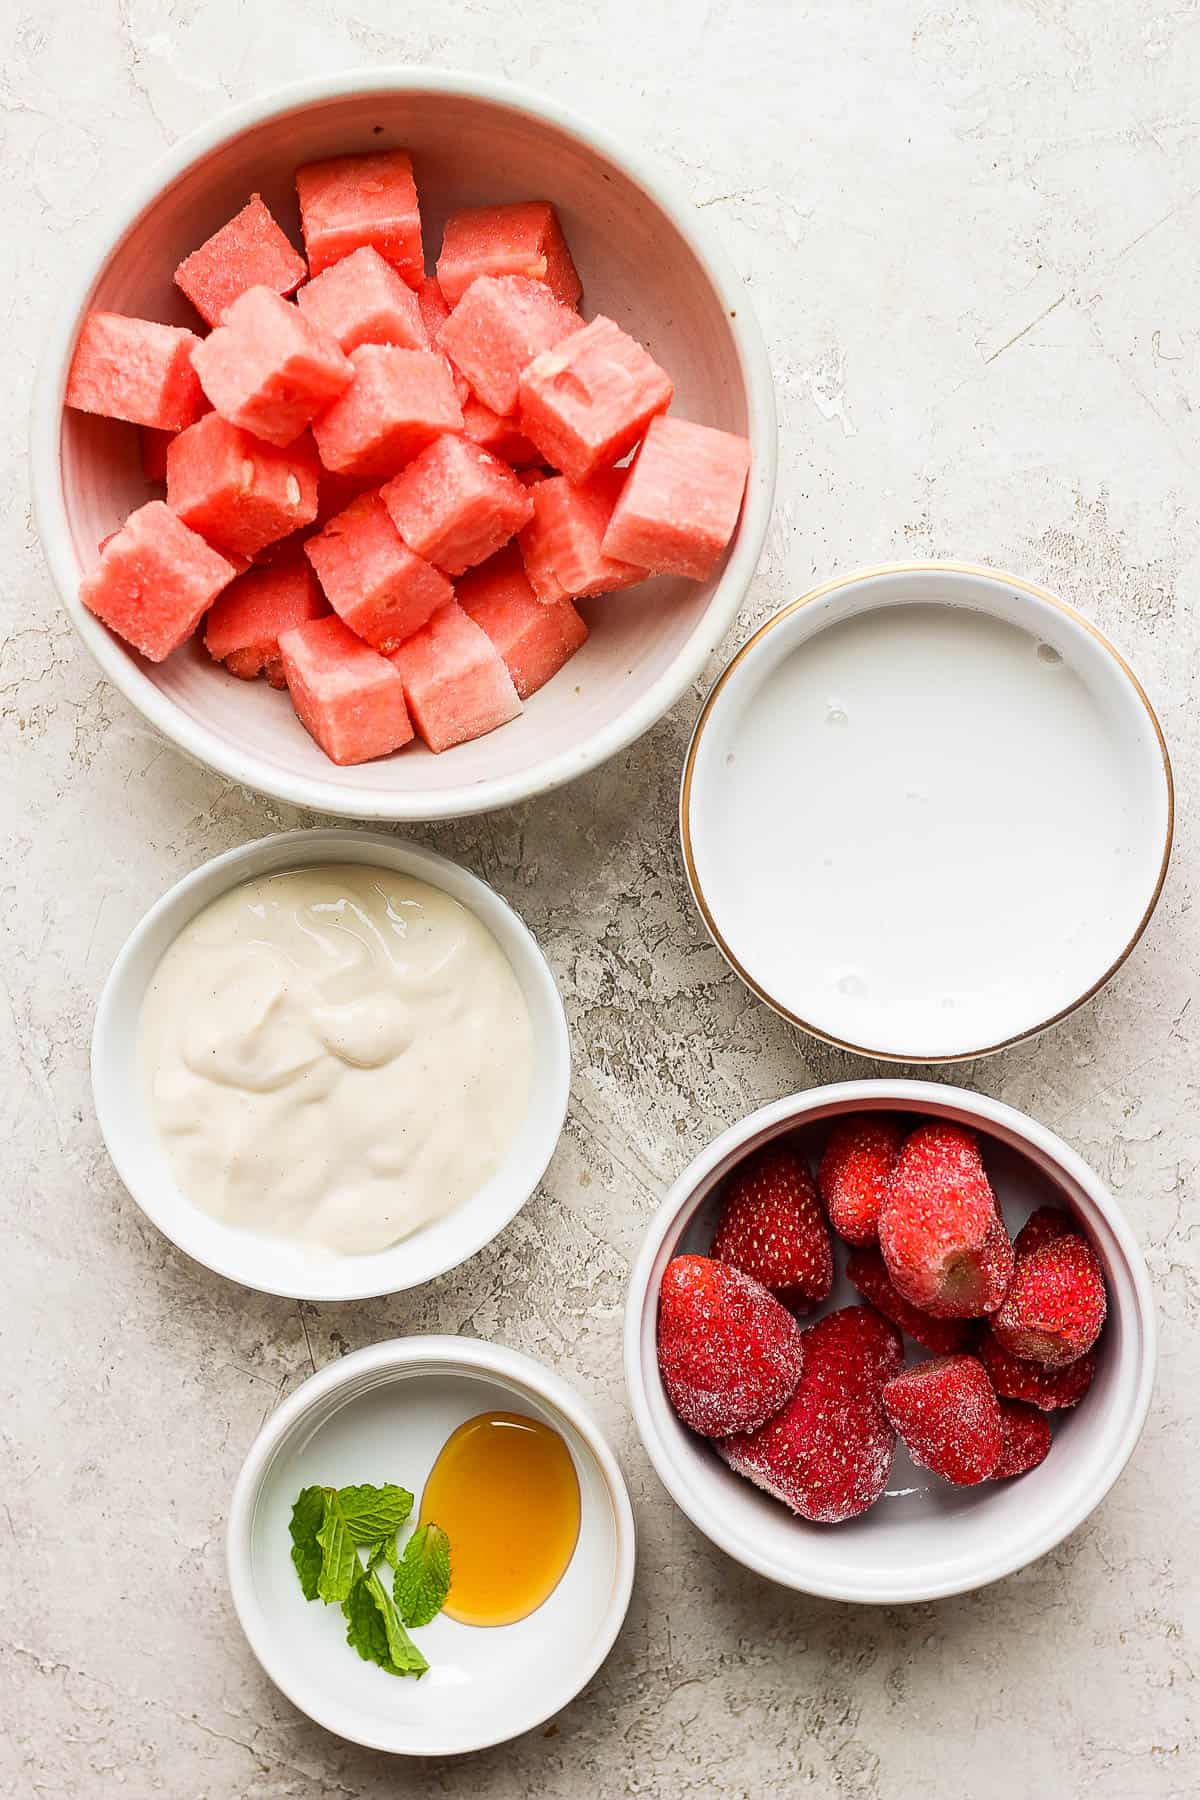 Ingredients for a watermelon smoothie in separate bowls.